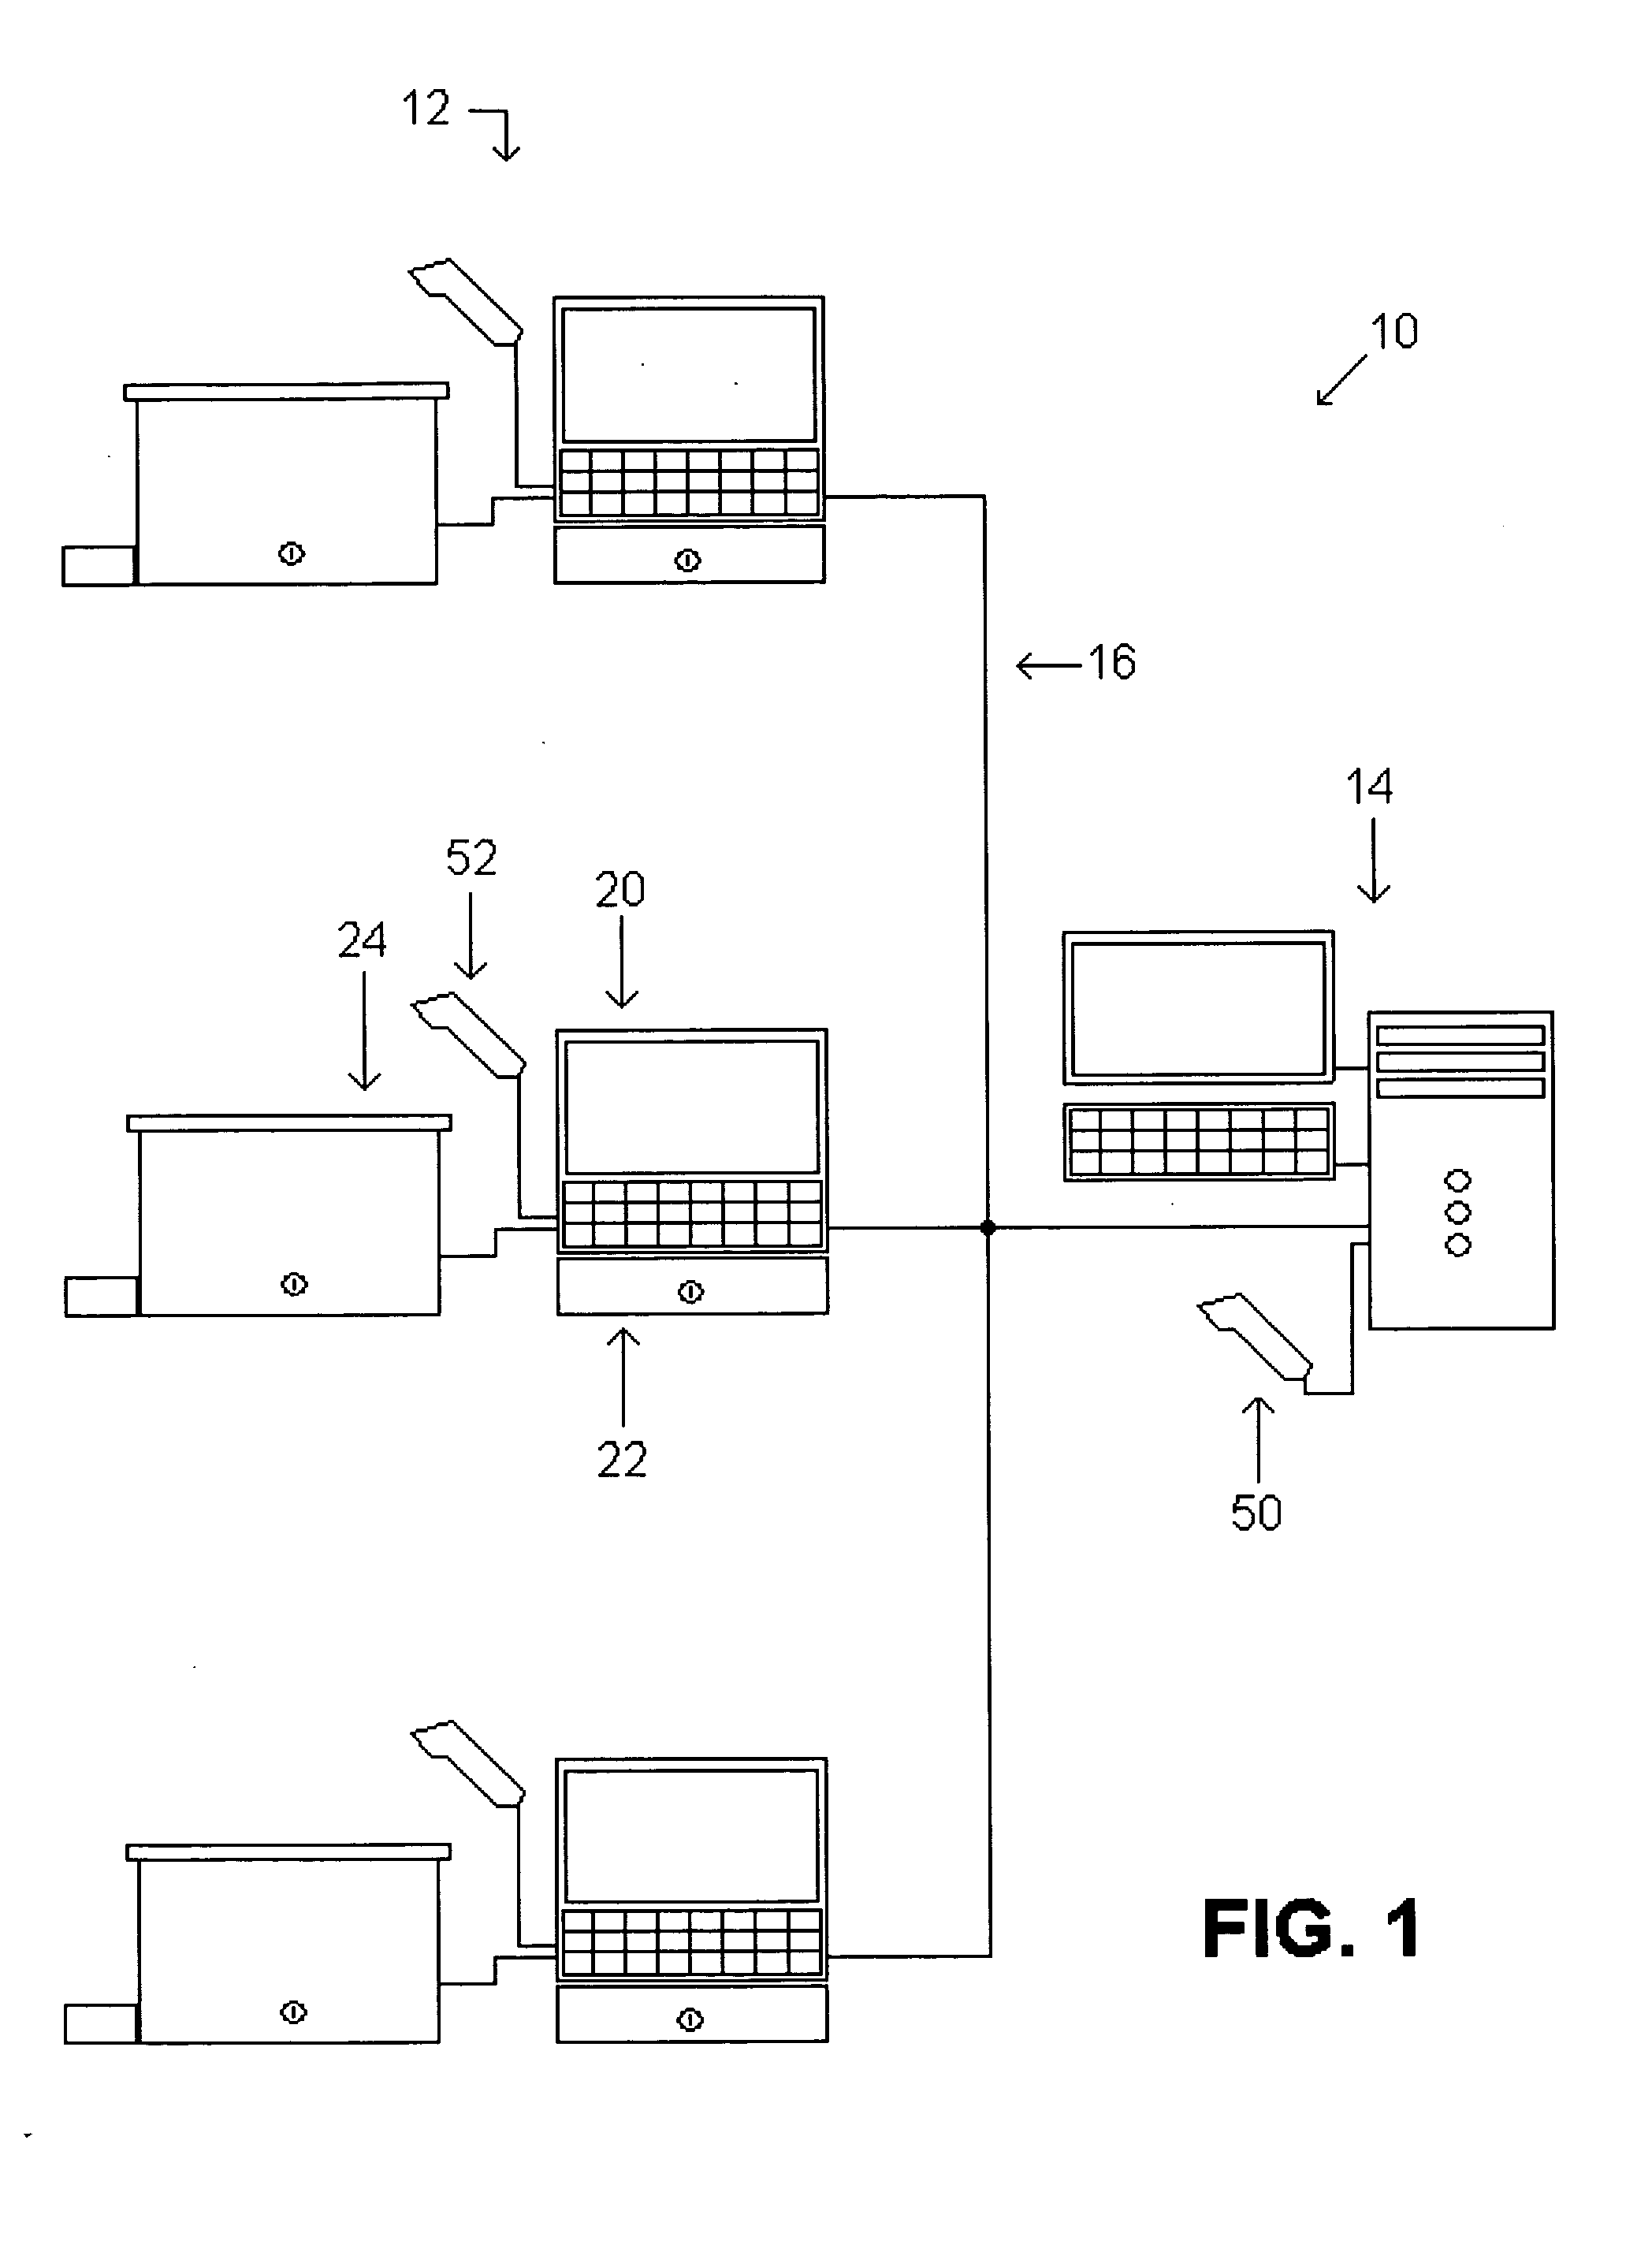 System and method for managing dispensation and attribution of coins